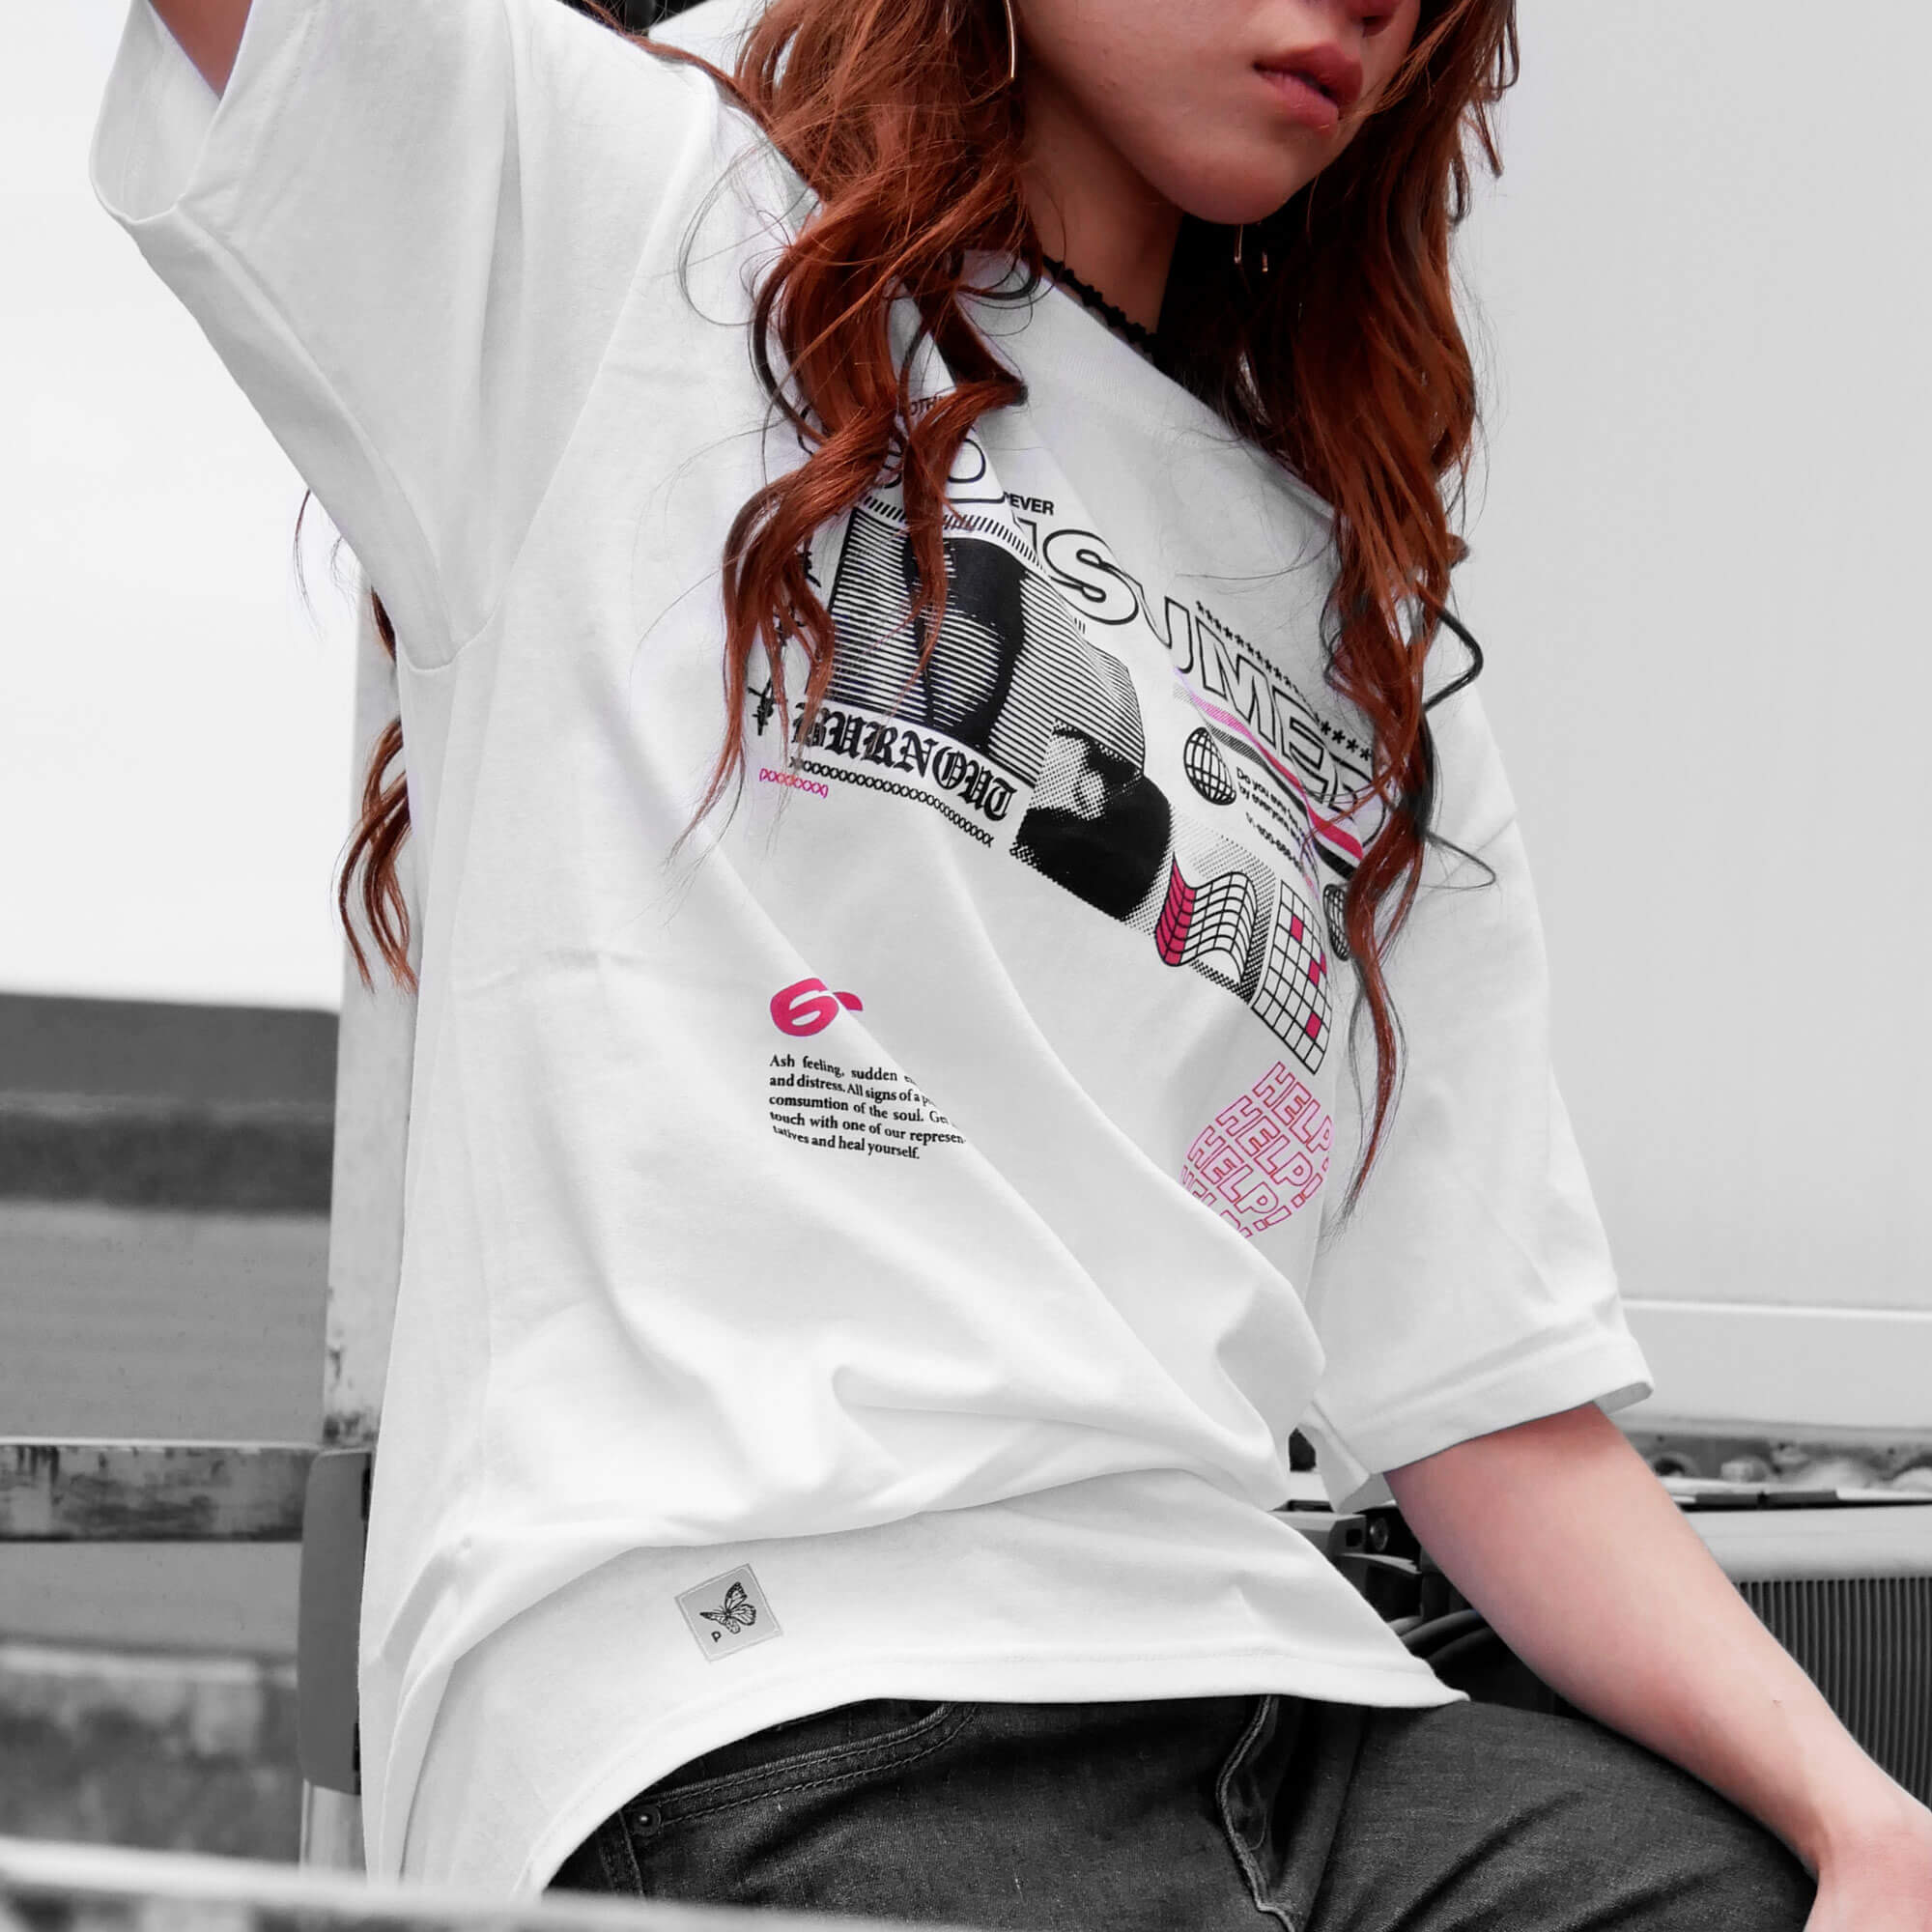 Angle view of model wearing CONSUMED white t-shirt from PHOSIS Clothing